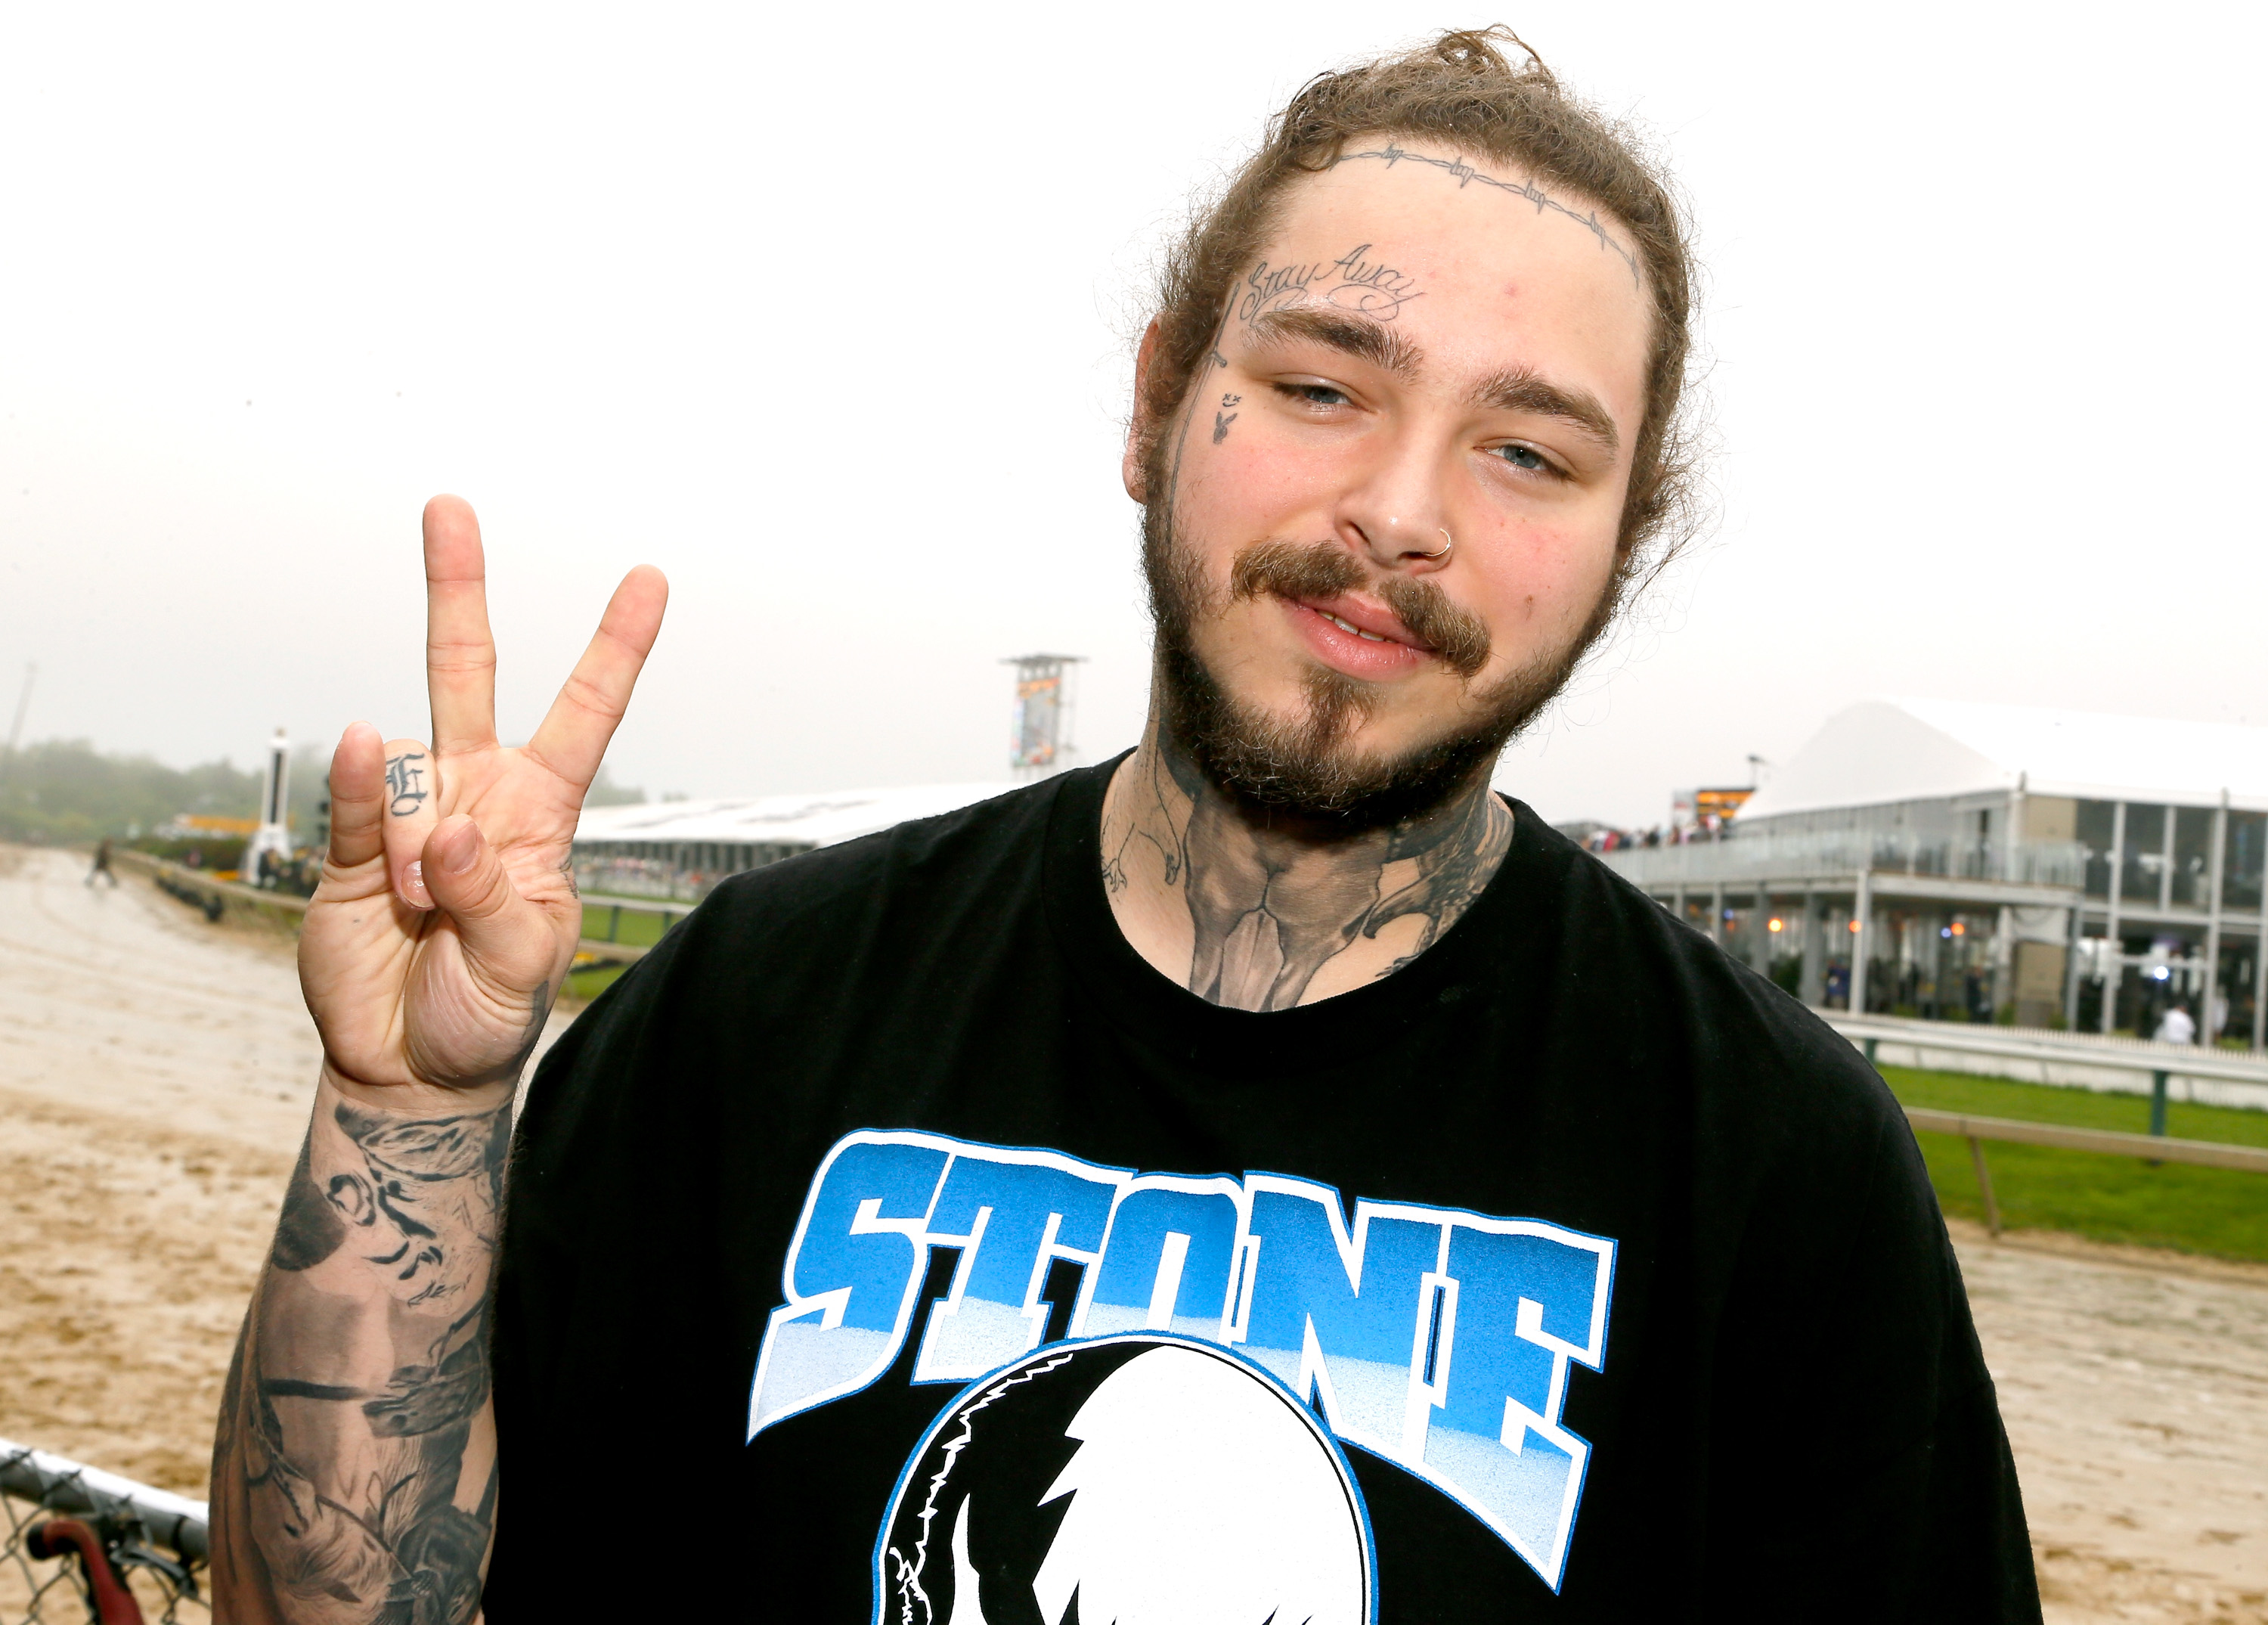 Post Malone making a peace sign with his fingers